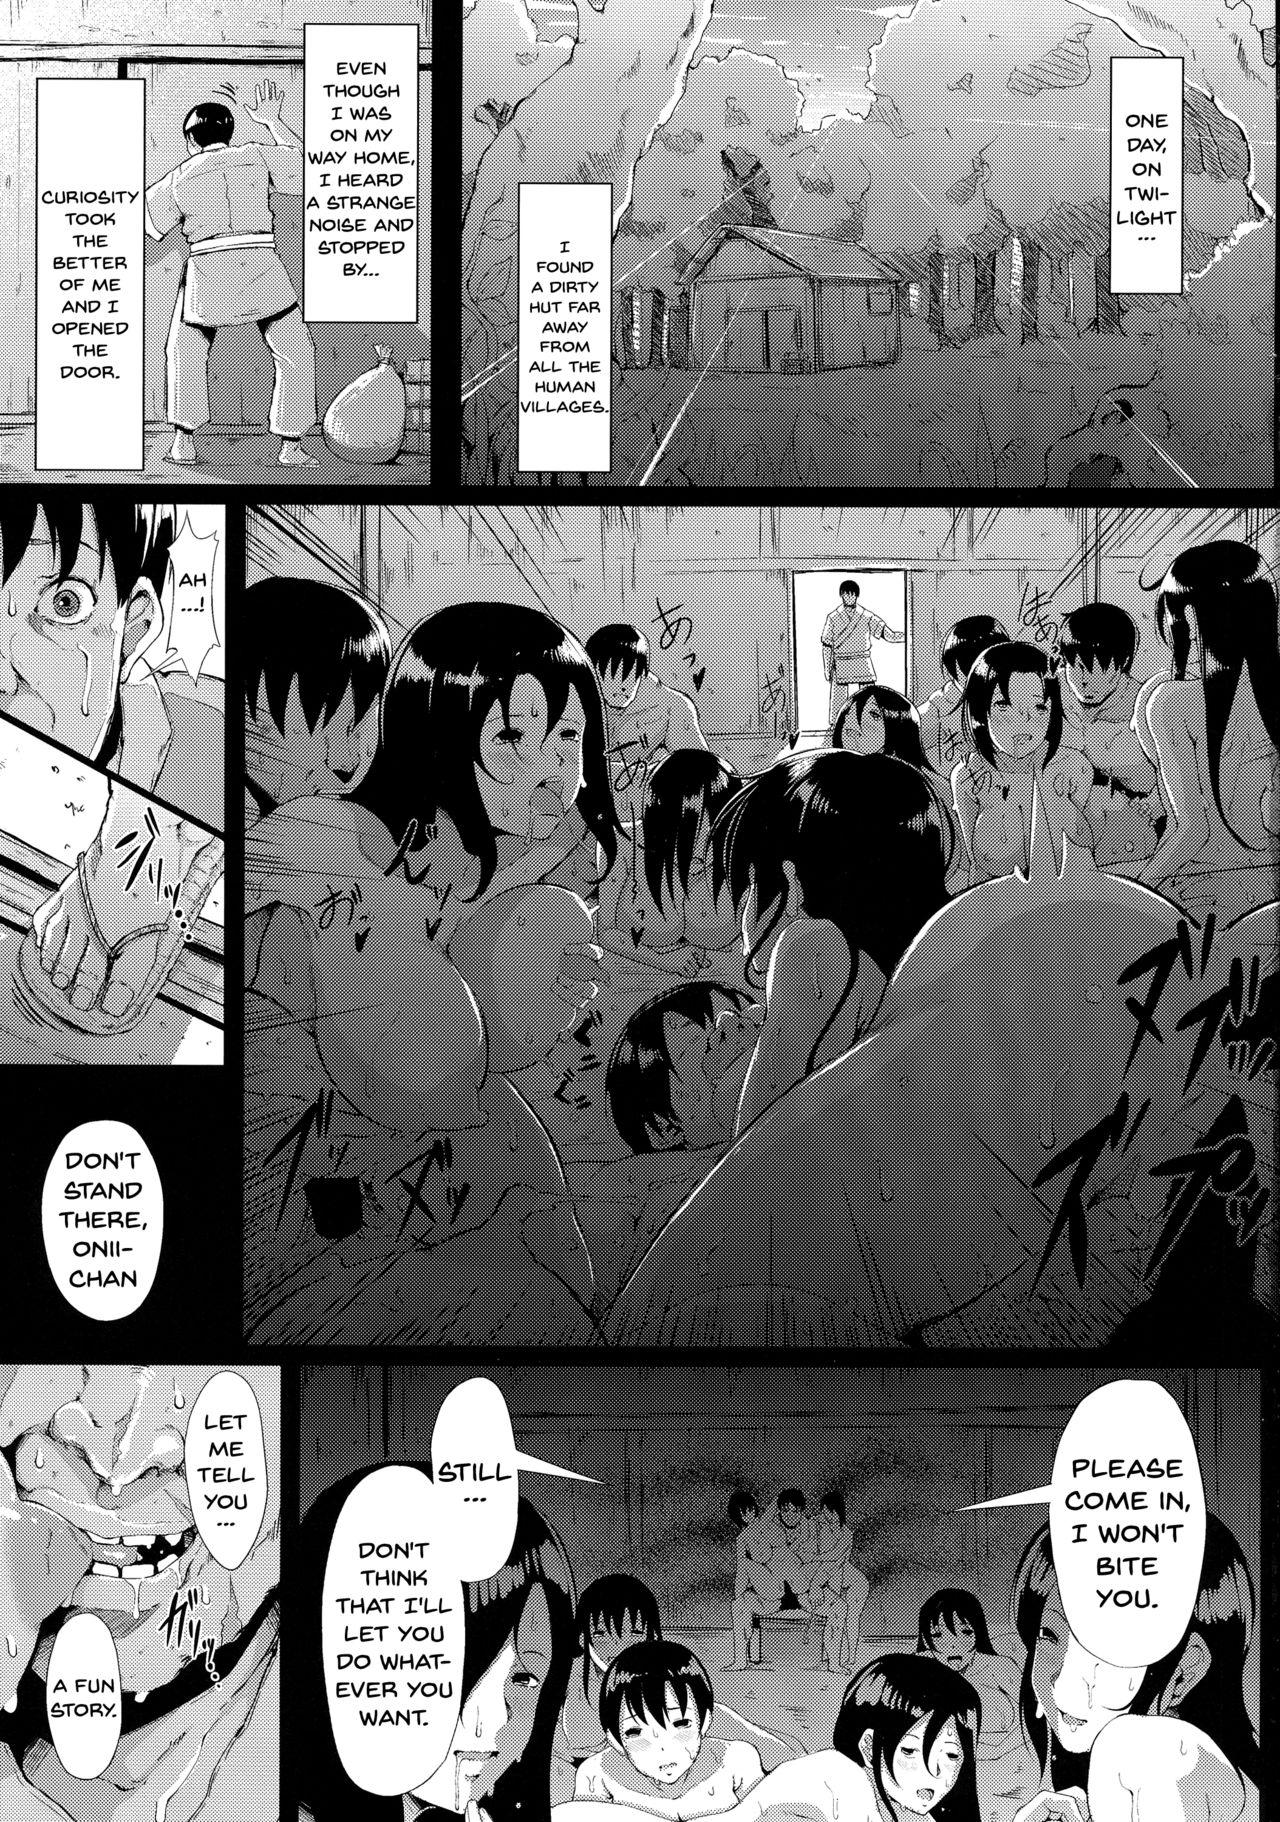 Spreading AdultsOnly 3 Zen - Touhou project Adult - Page 5